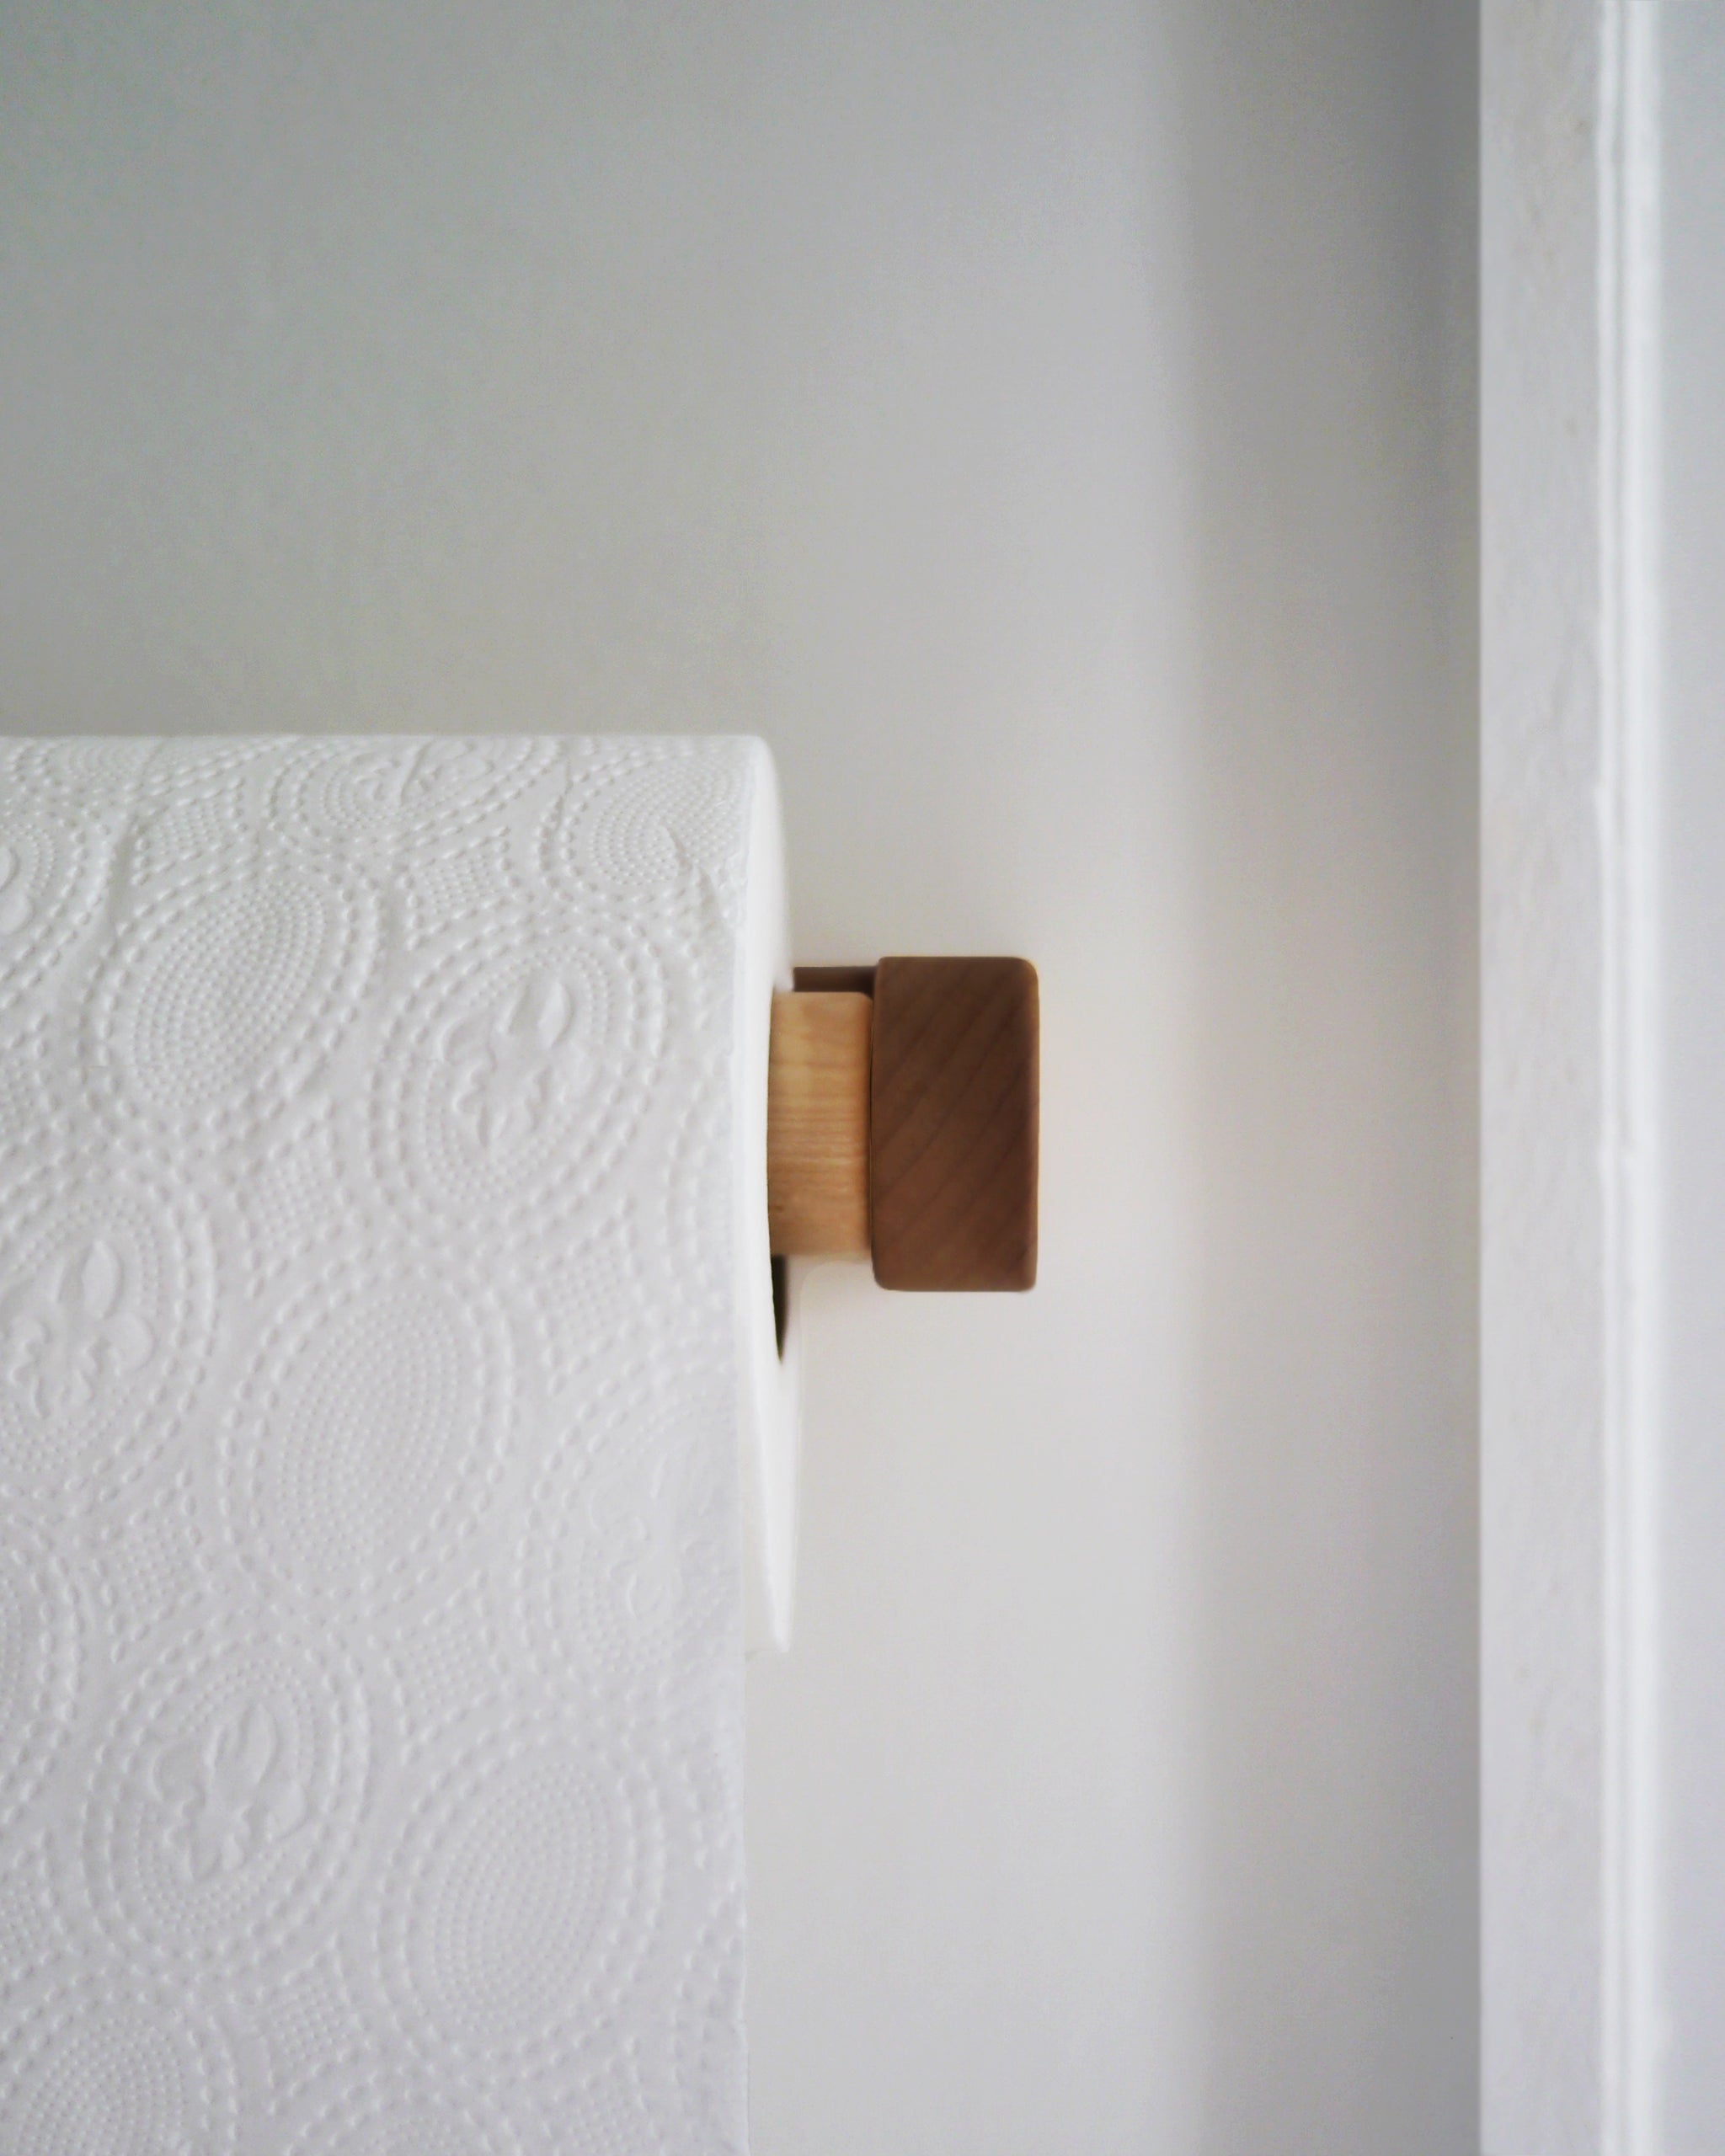 Walnut Wood toilet paper holder designed by Makoto Koizumi in context with toilet paper